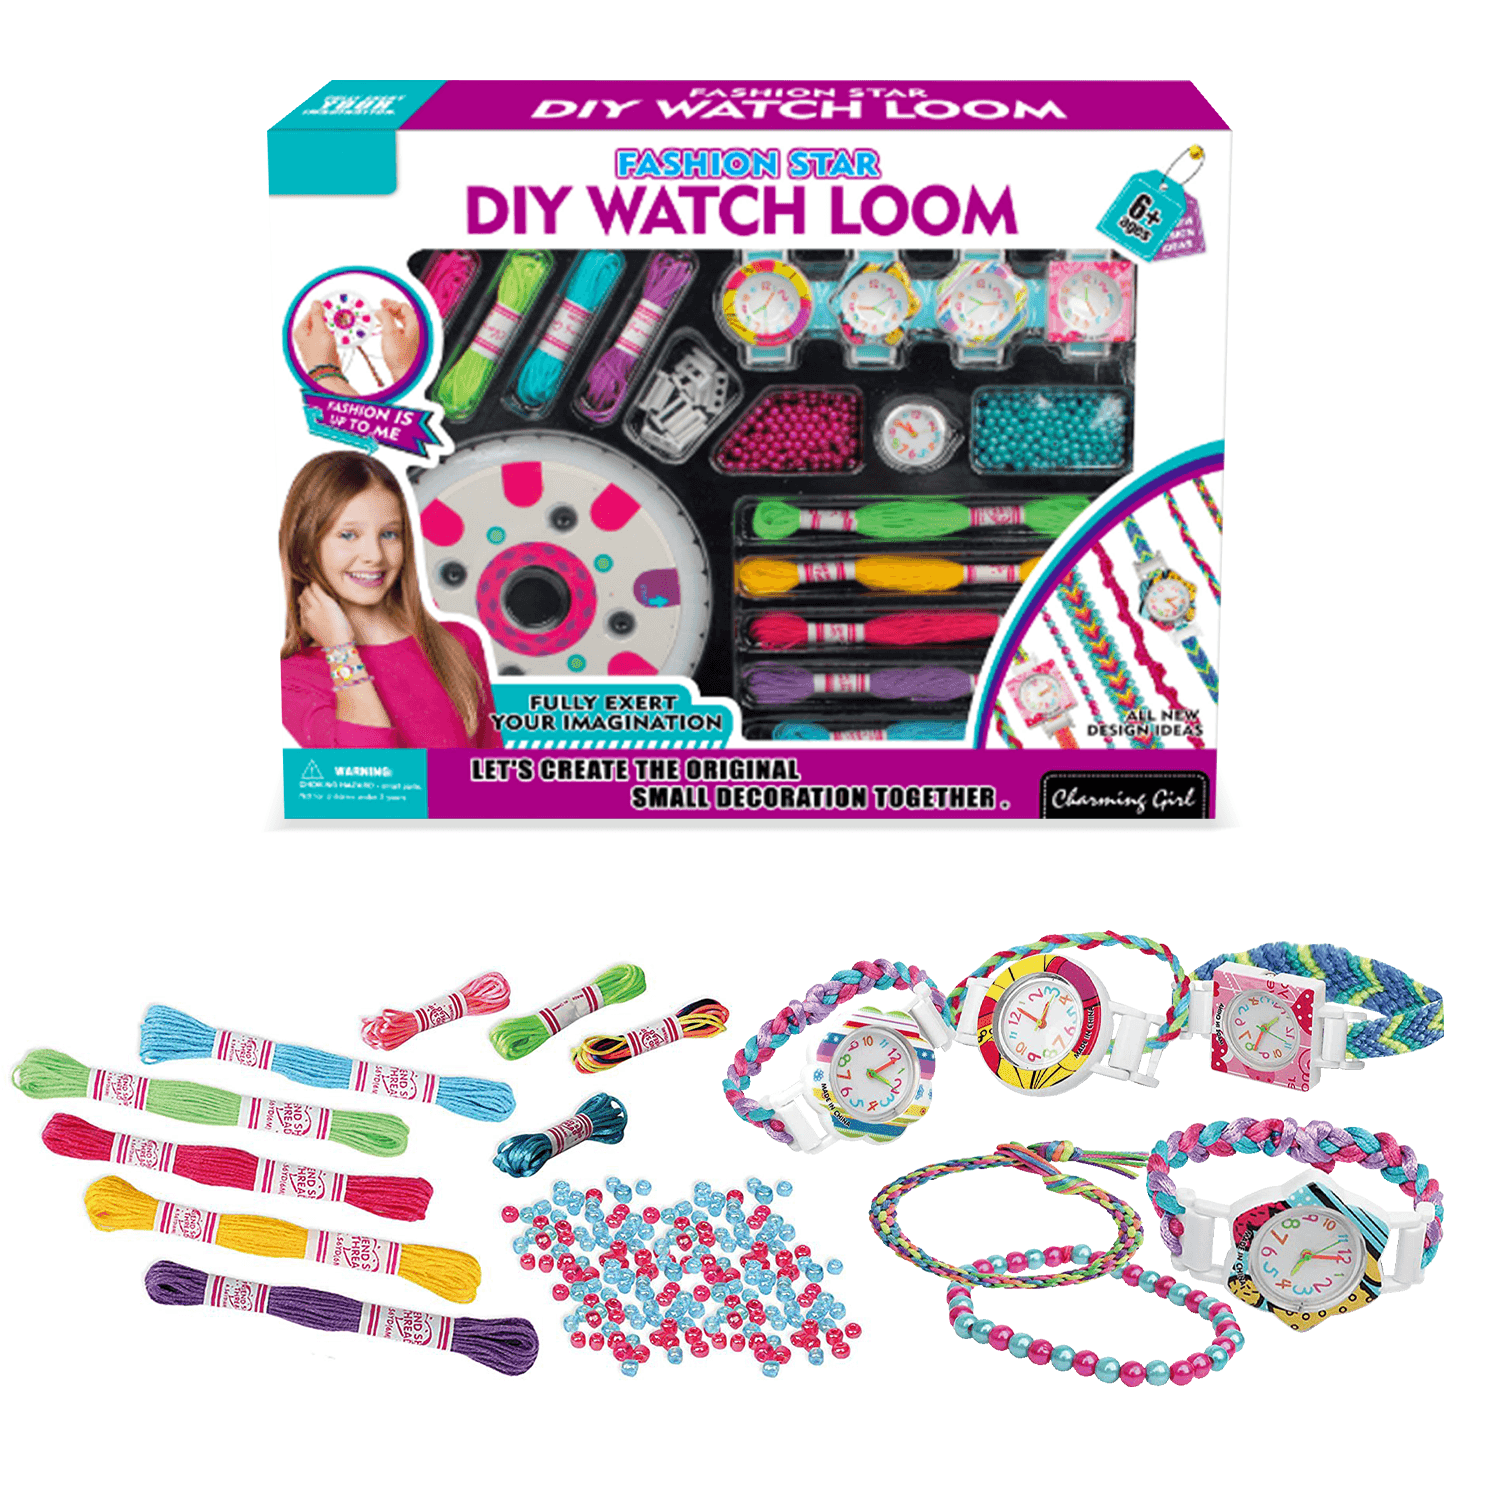 Invench Bracelets Making Kit Toys for Girls 8-11 Years, Glow in Night Charm Beads for Jewelry Making Girls Gifts, Size: 9 x 9 x 2